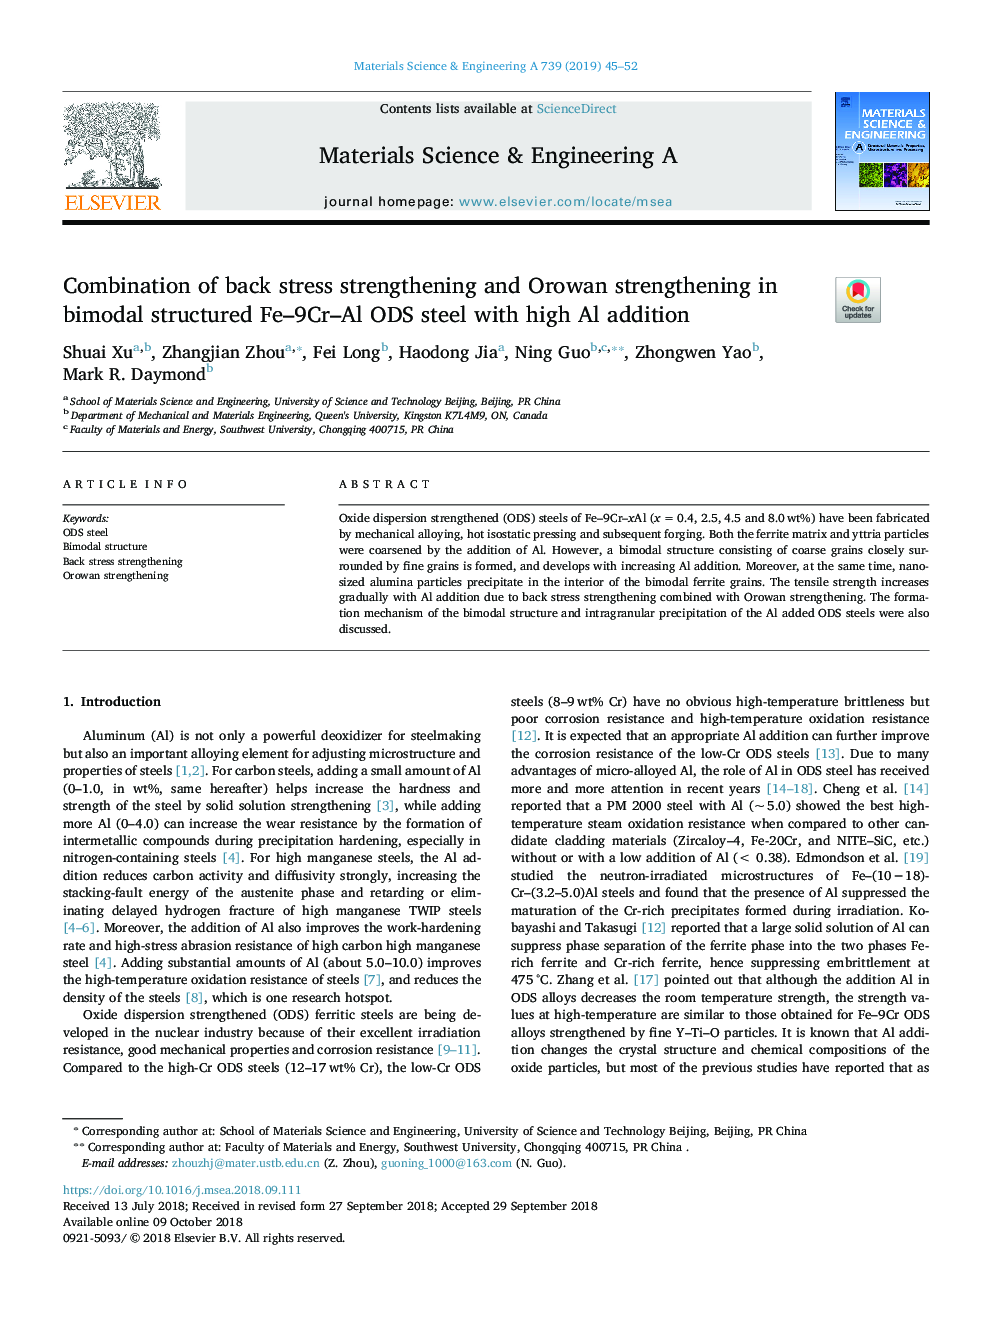 Combination of back stress strengthening and Orowan strengthening in bimodal structured Fe-9Cr-Al ODS steel with high Al addition